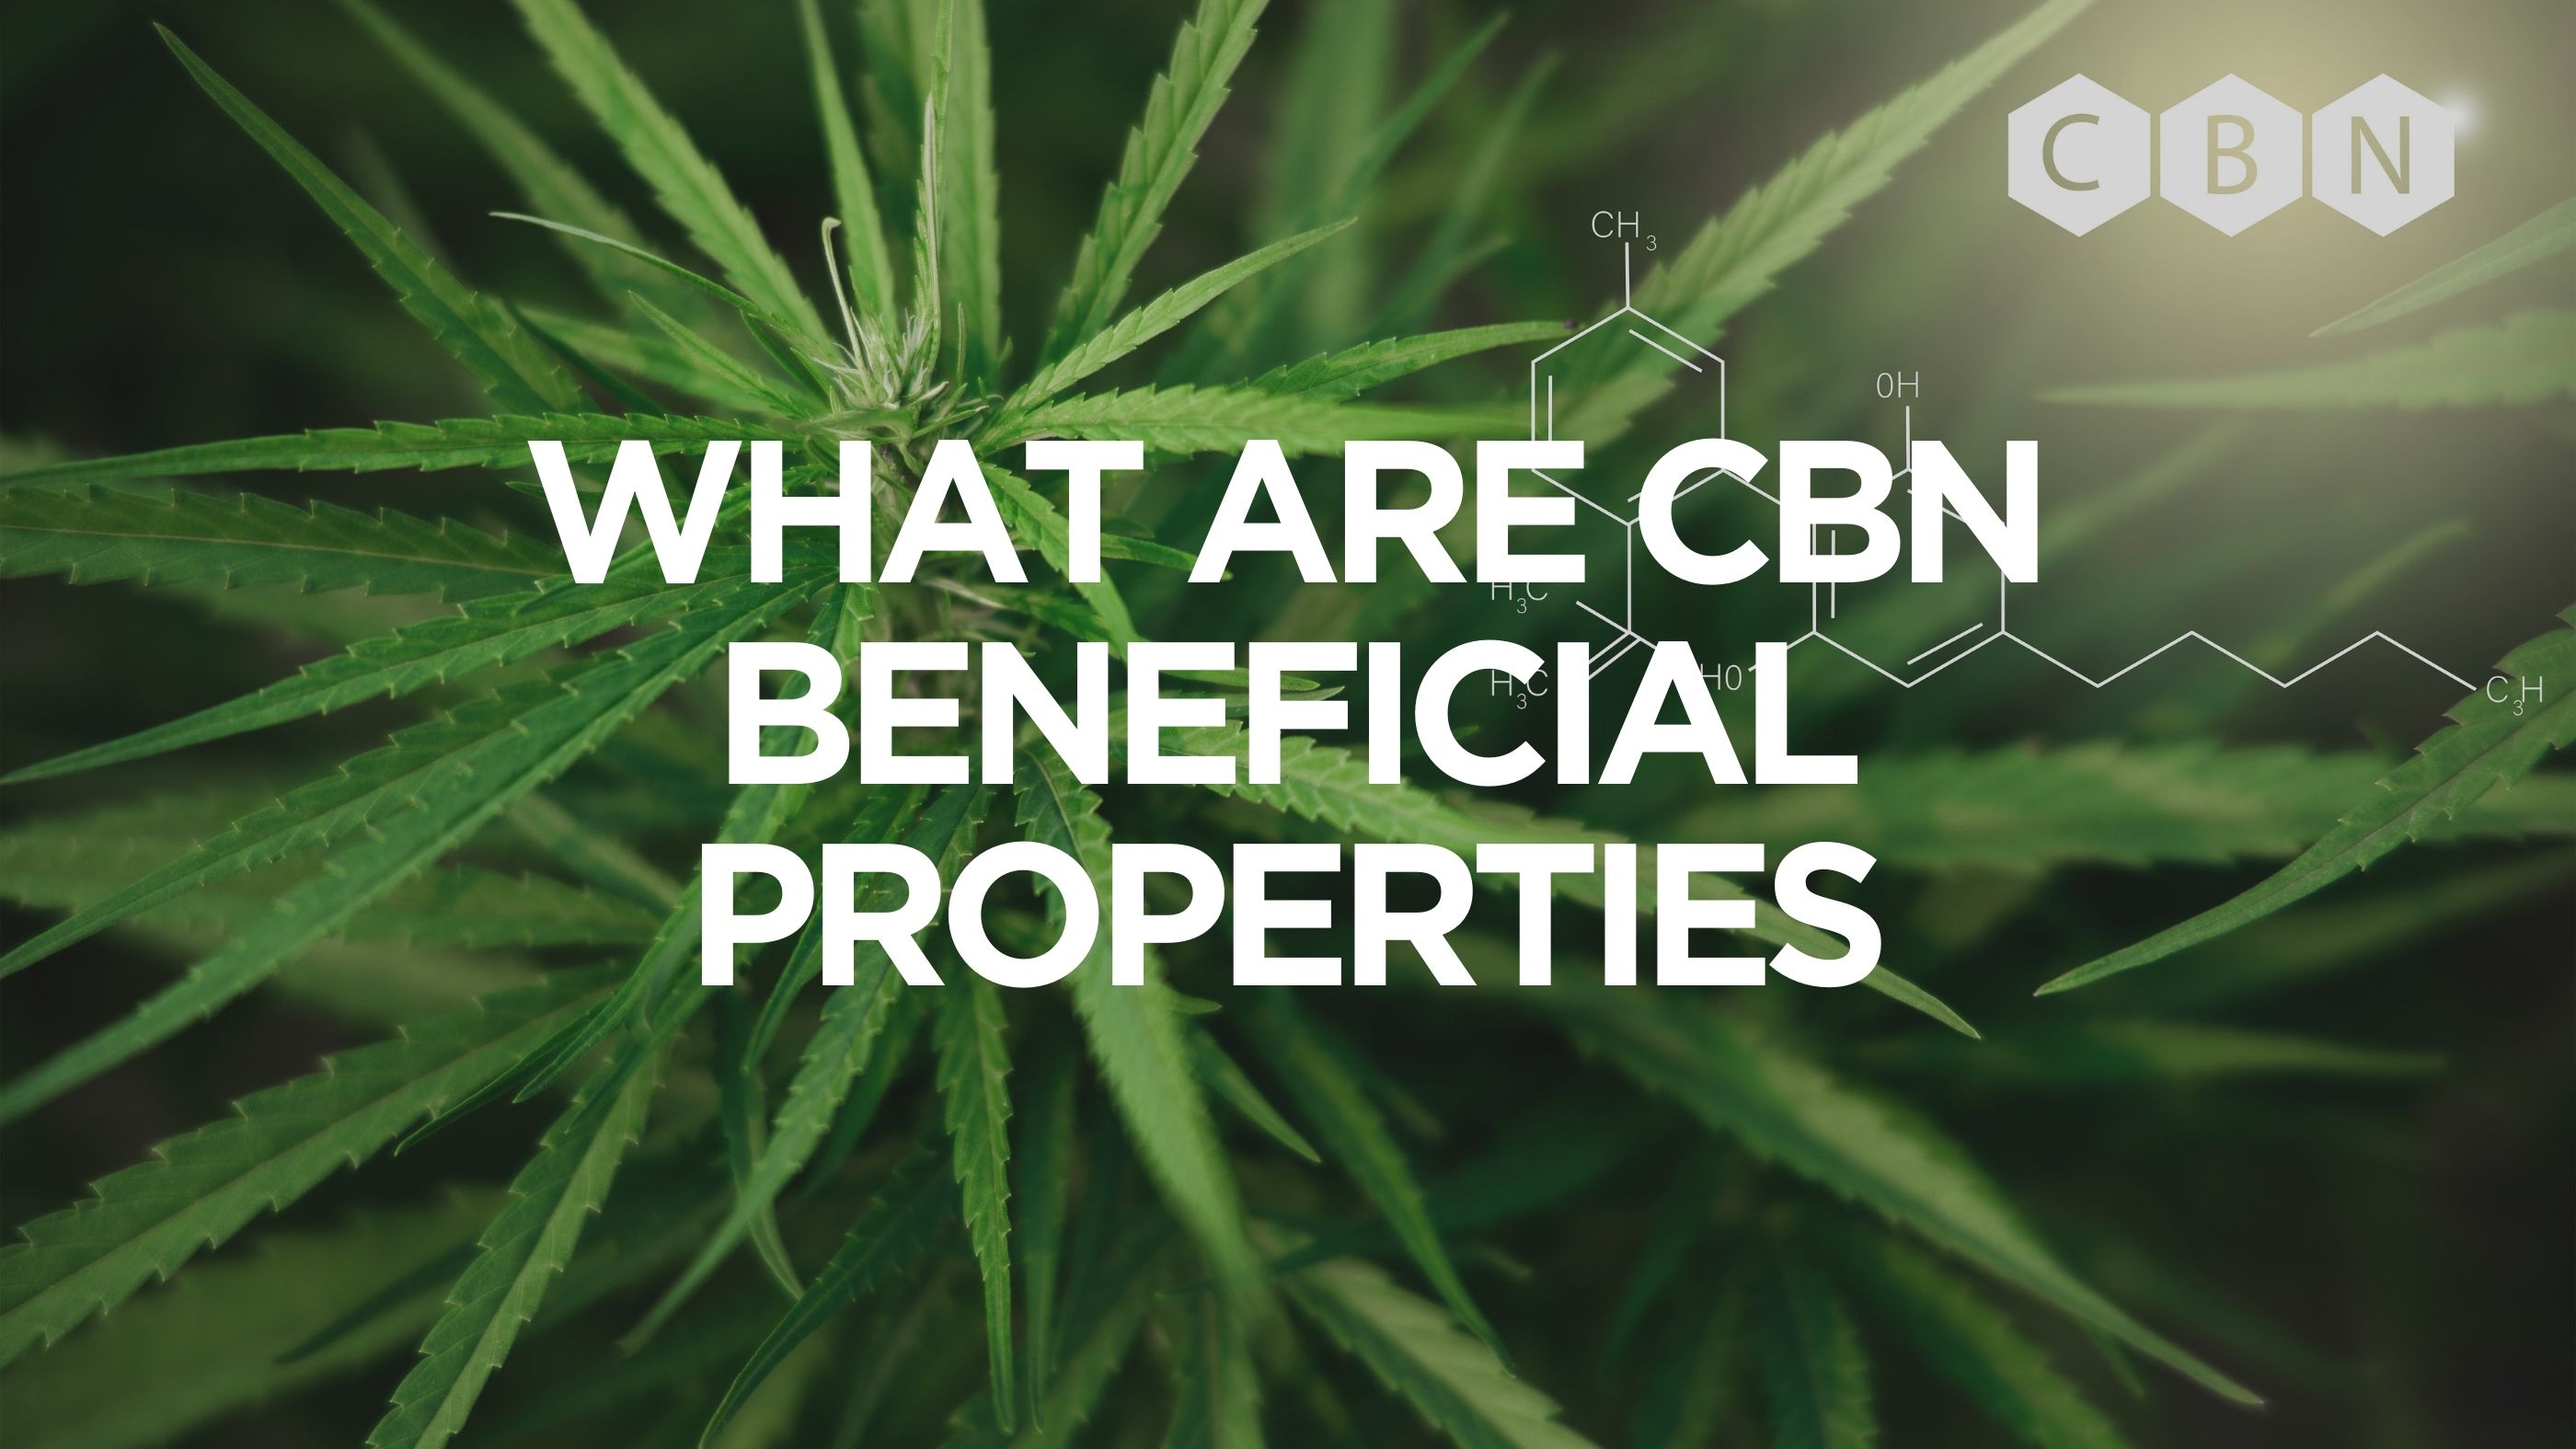 What Are CBN Beneficial Properties